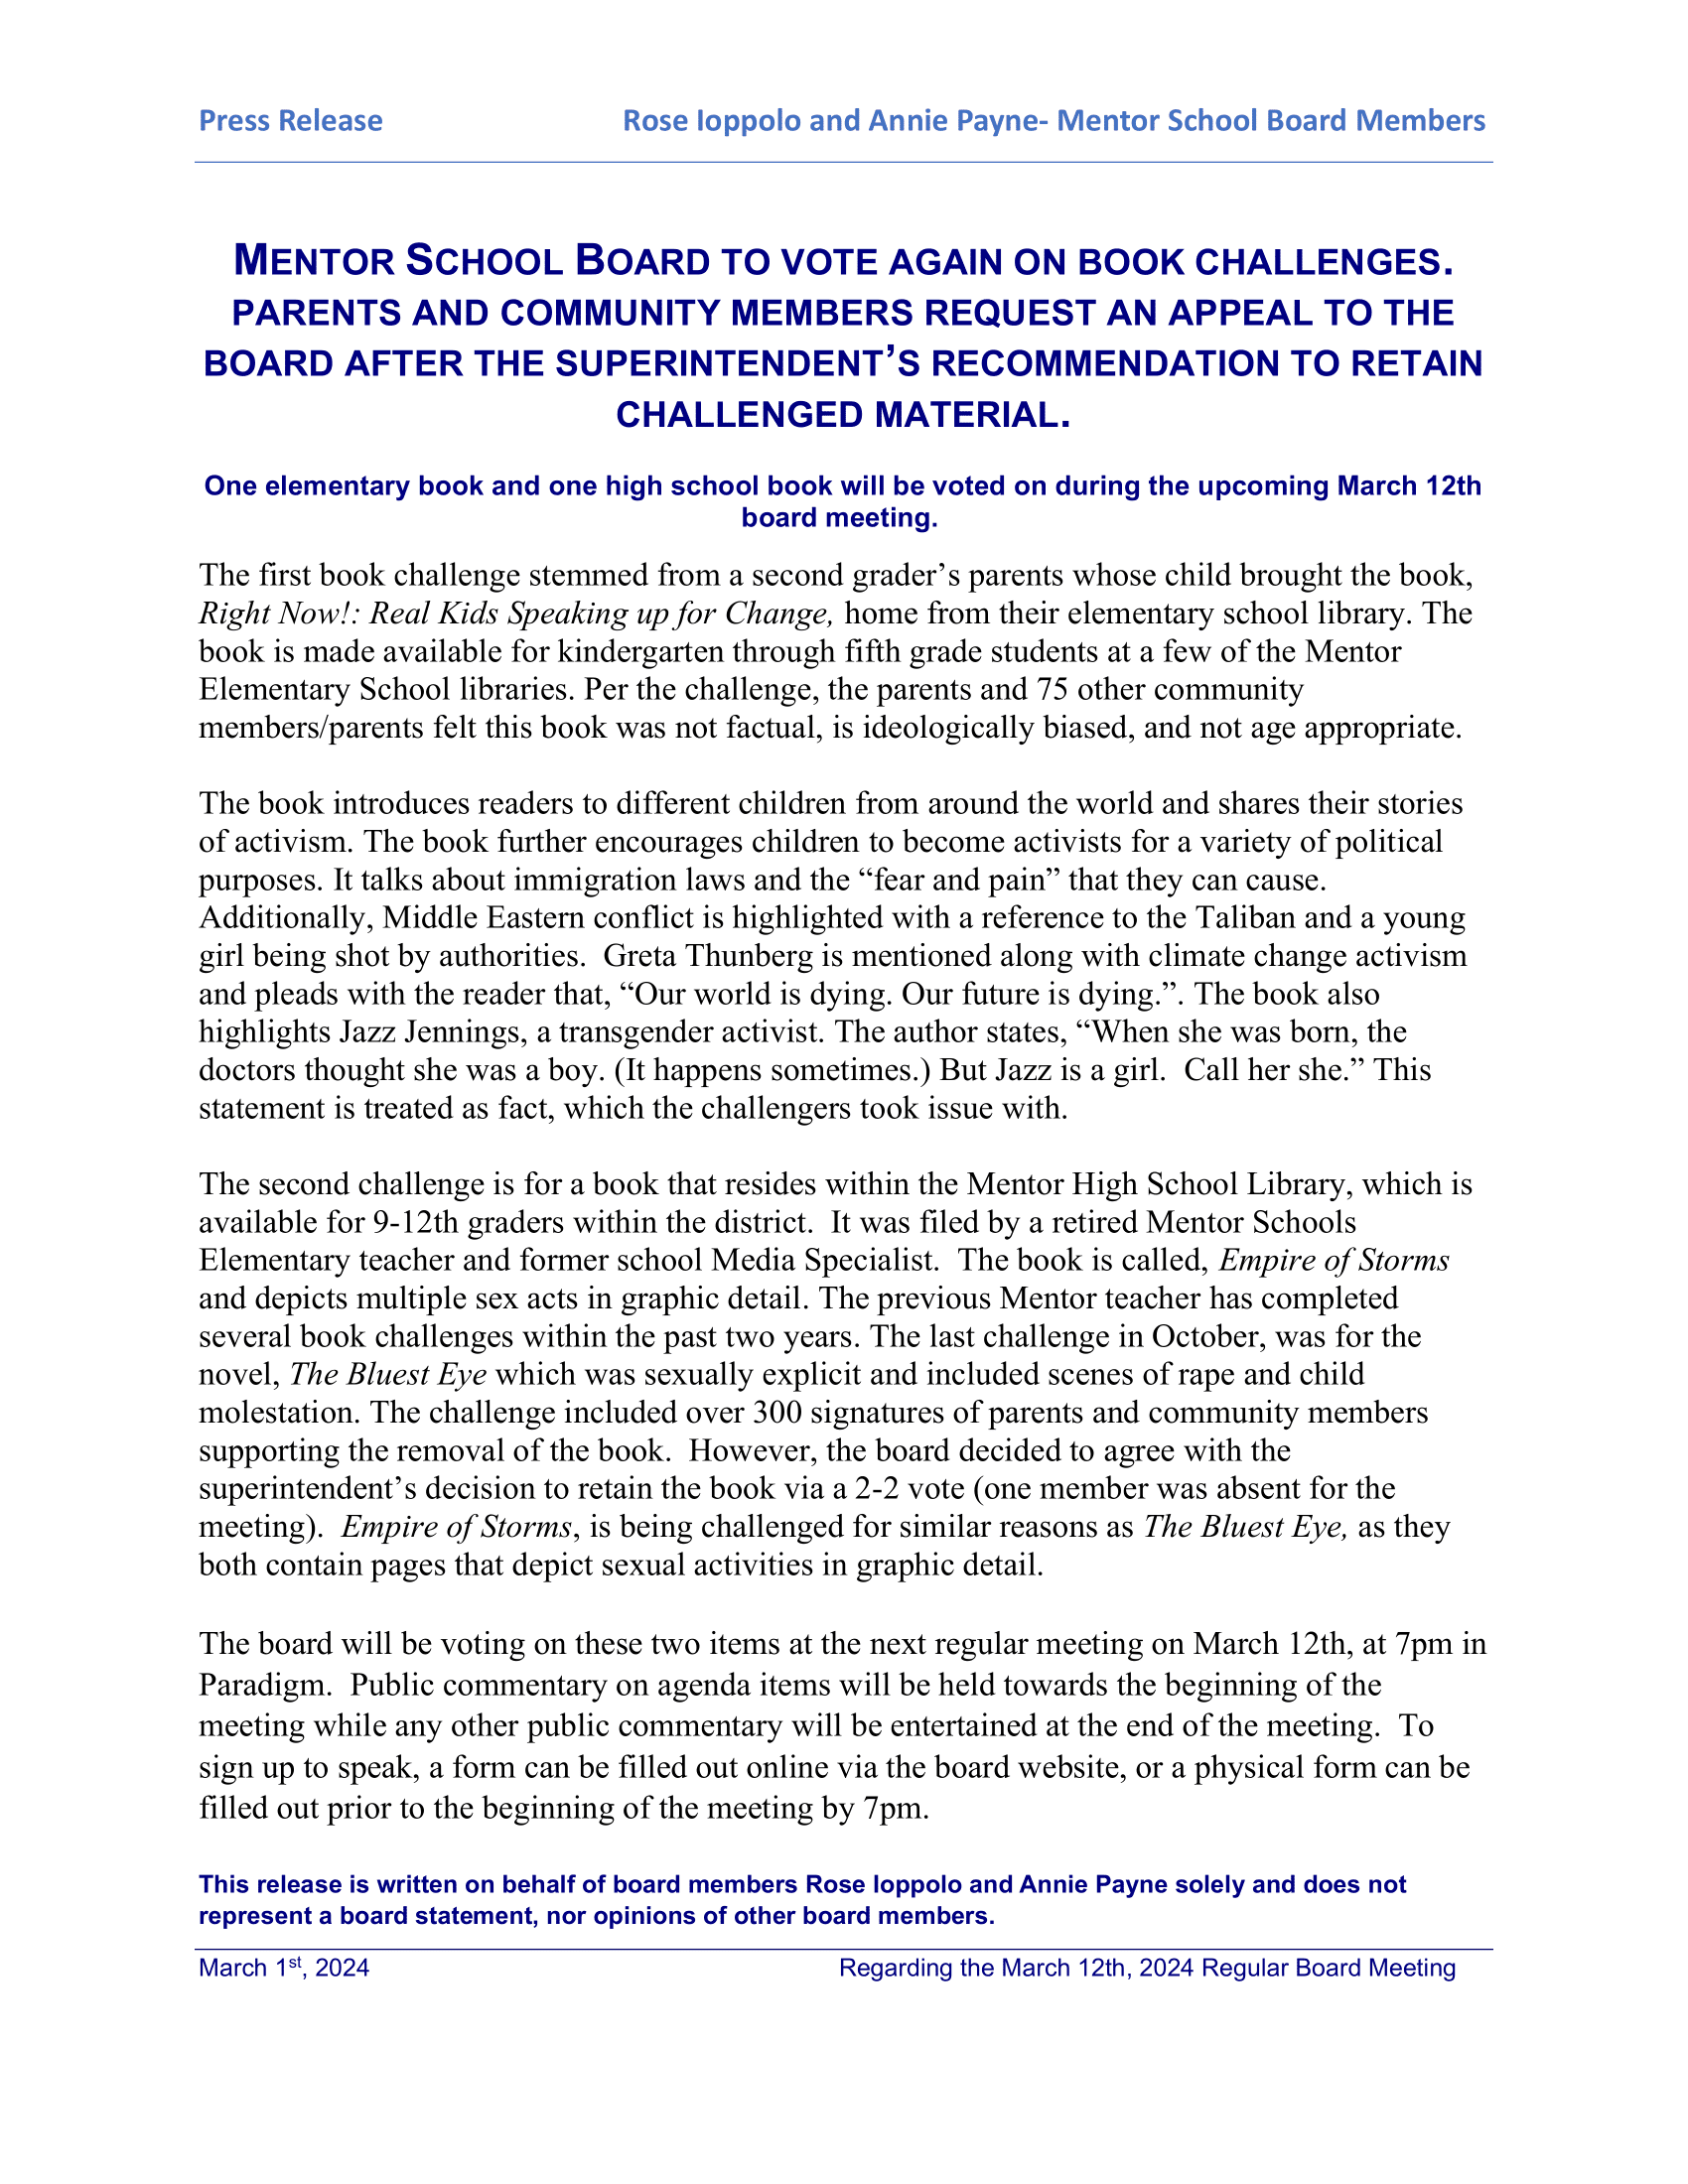 March 1st Press Release-1